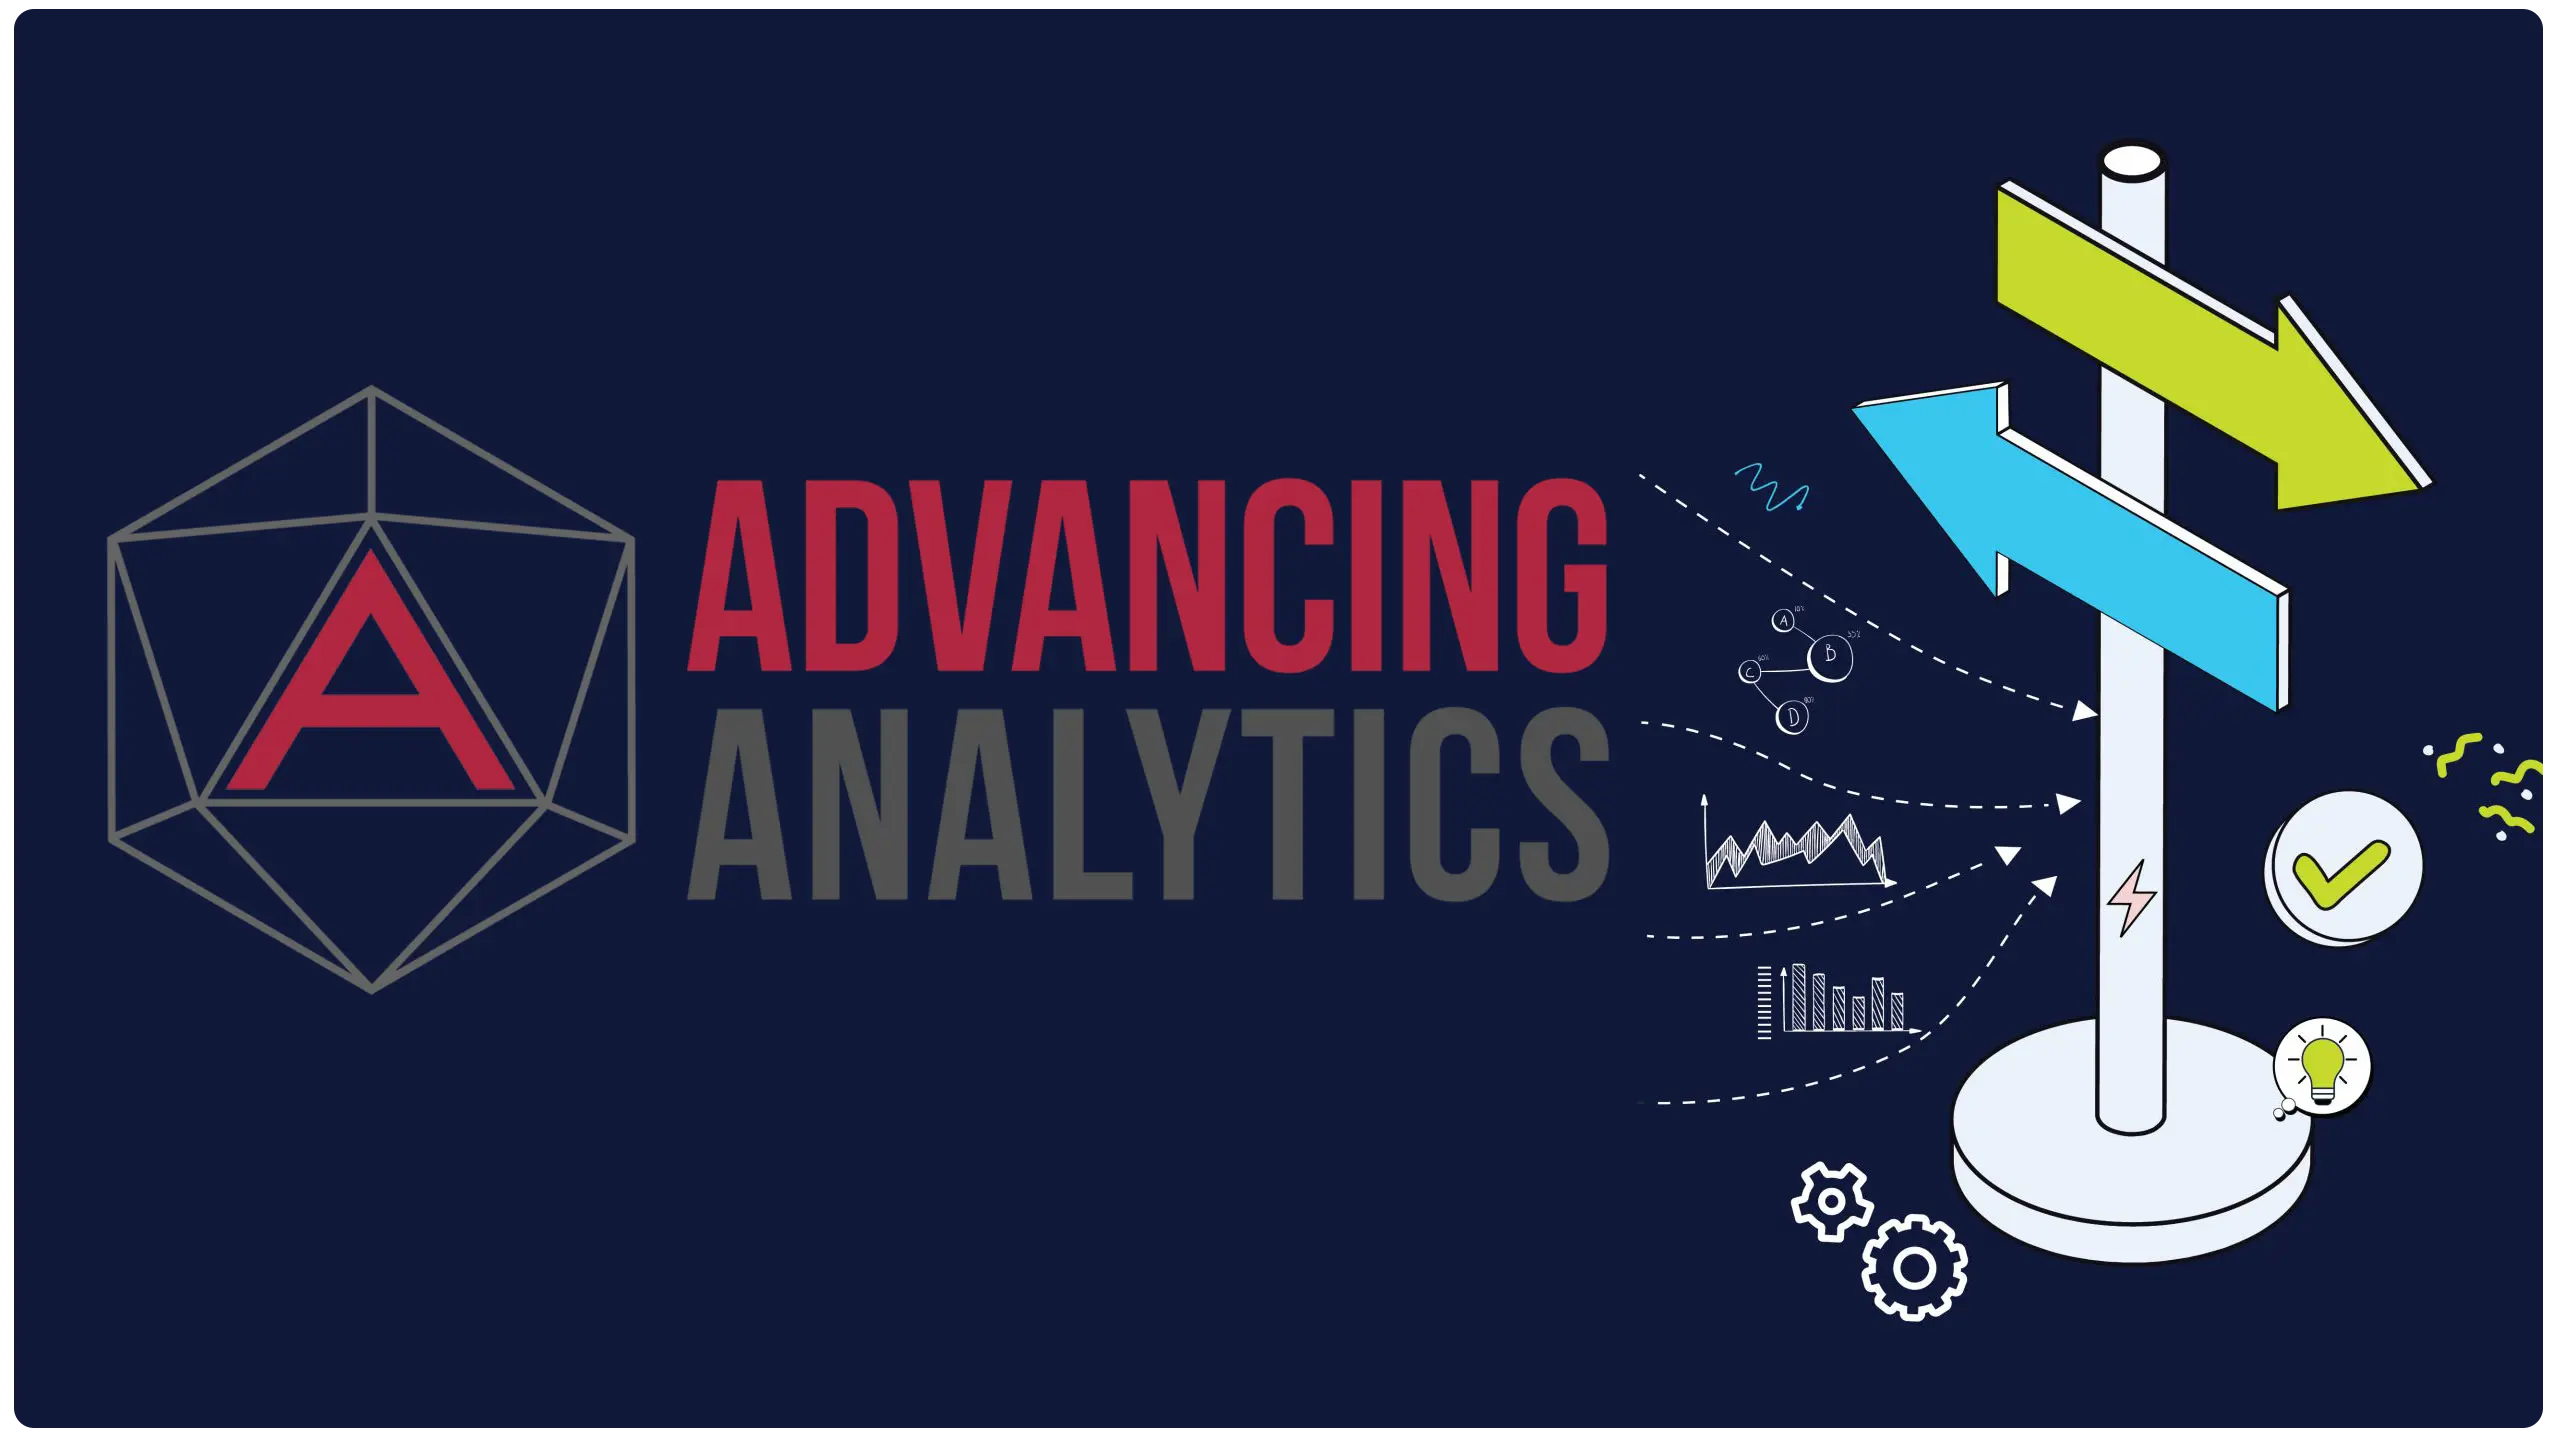 Why Choose Connect Infosoft Technologies for Advanced Analytics?